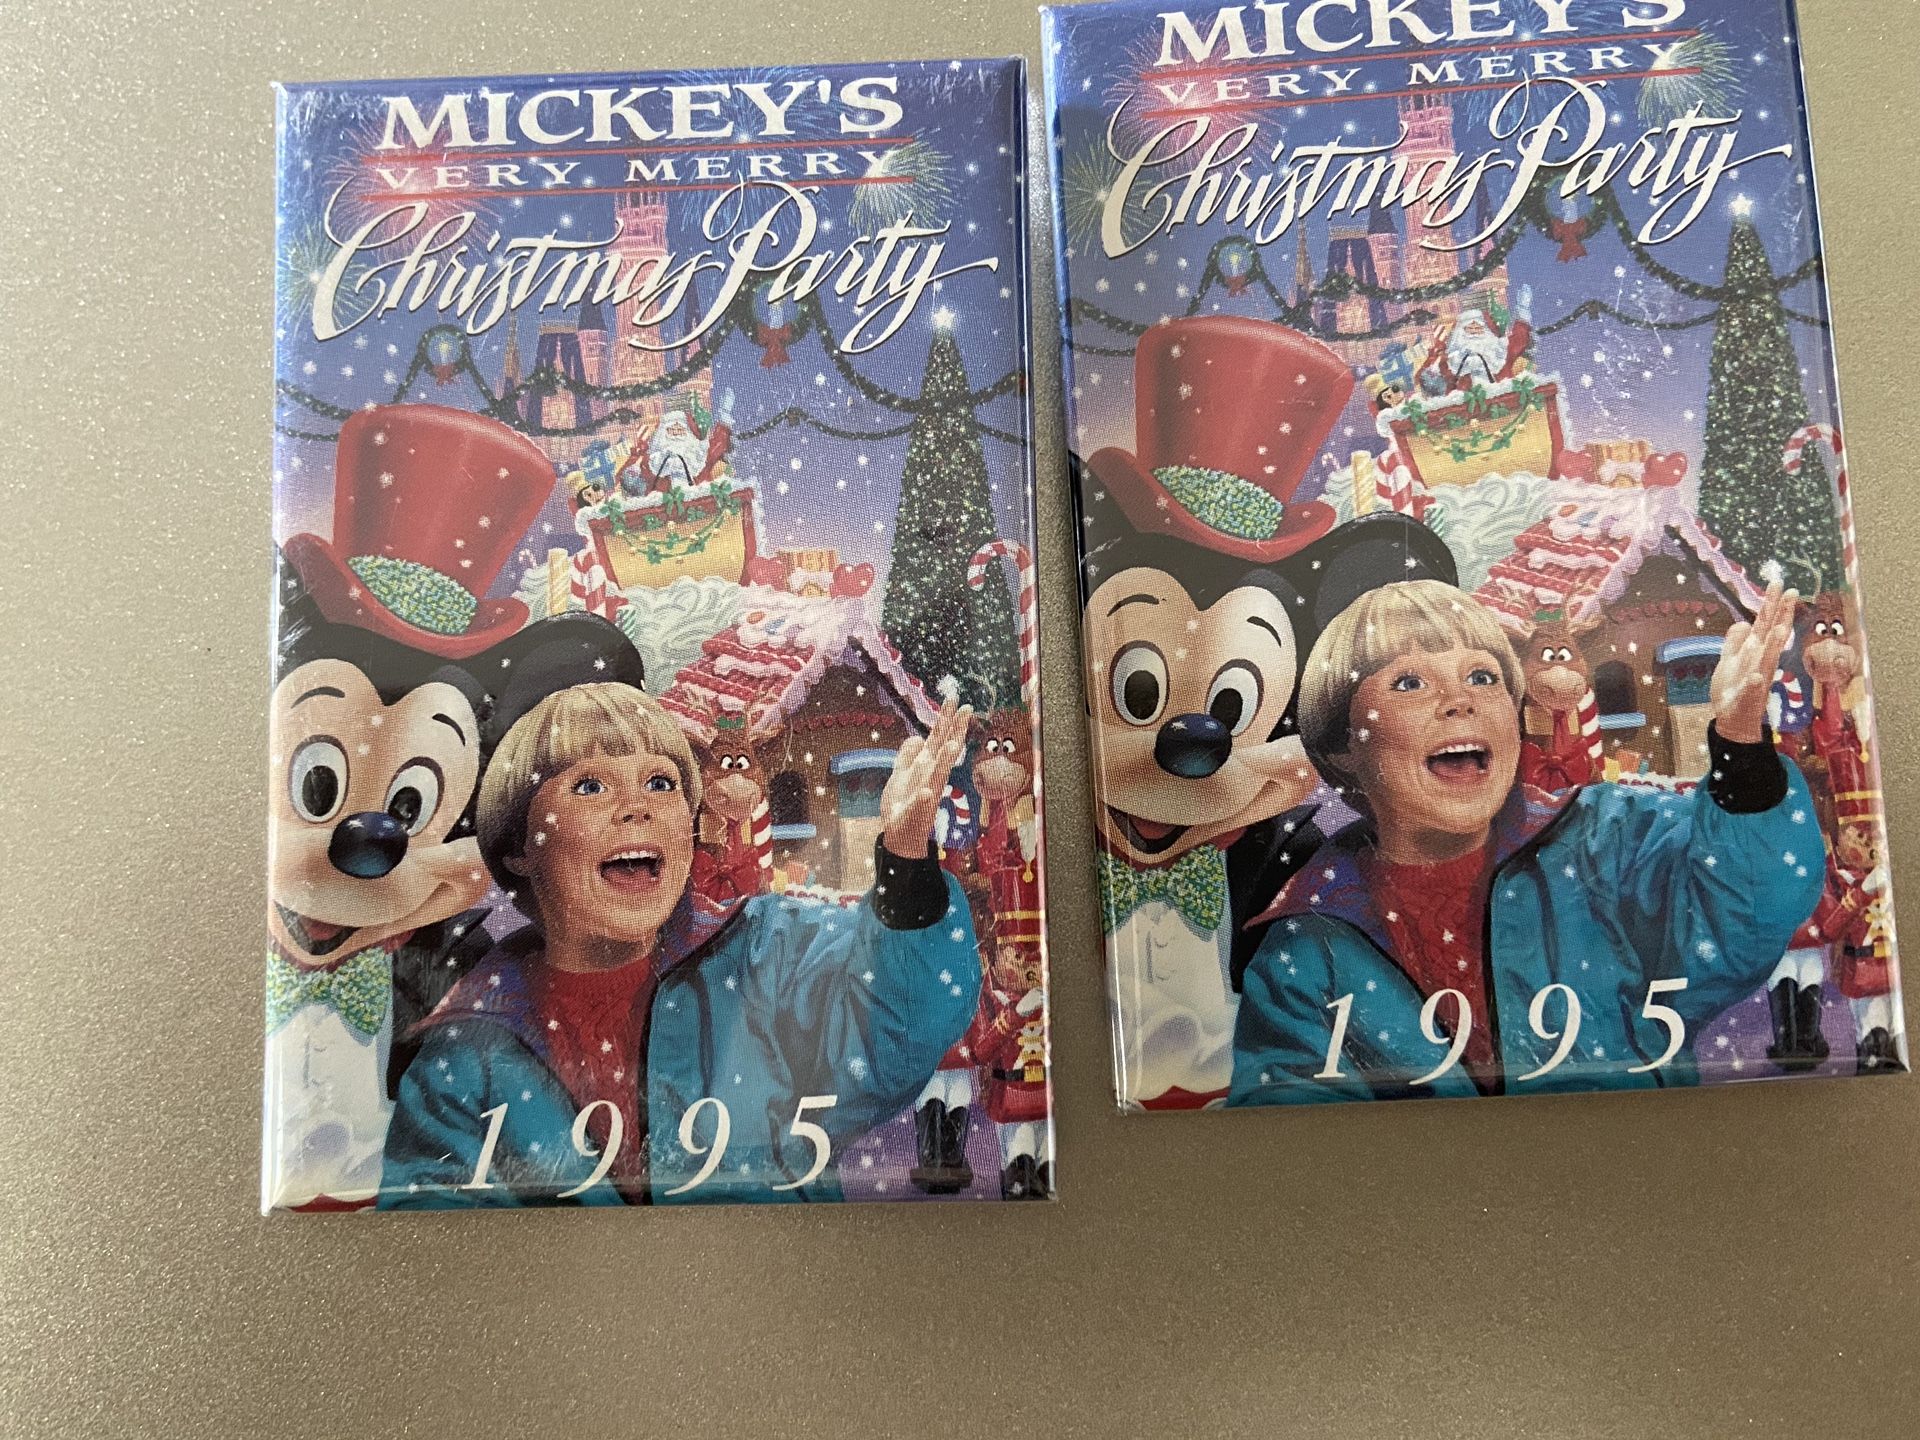 Disney Classic Very Merry Christmas Party 1995 Pins